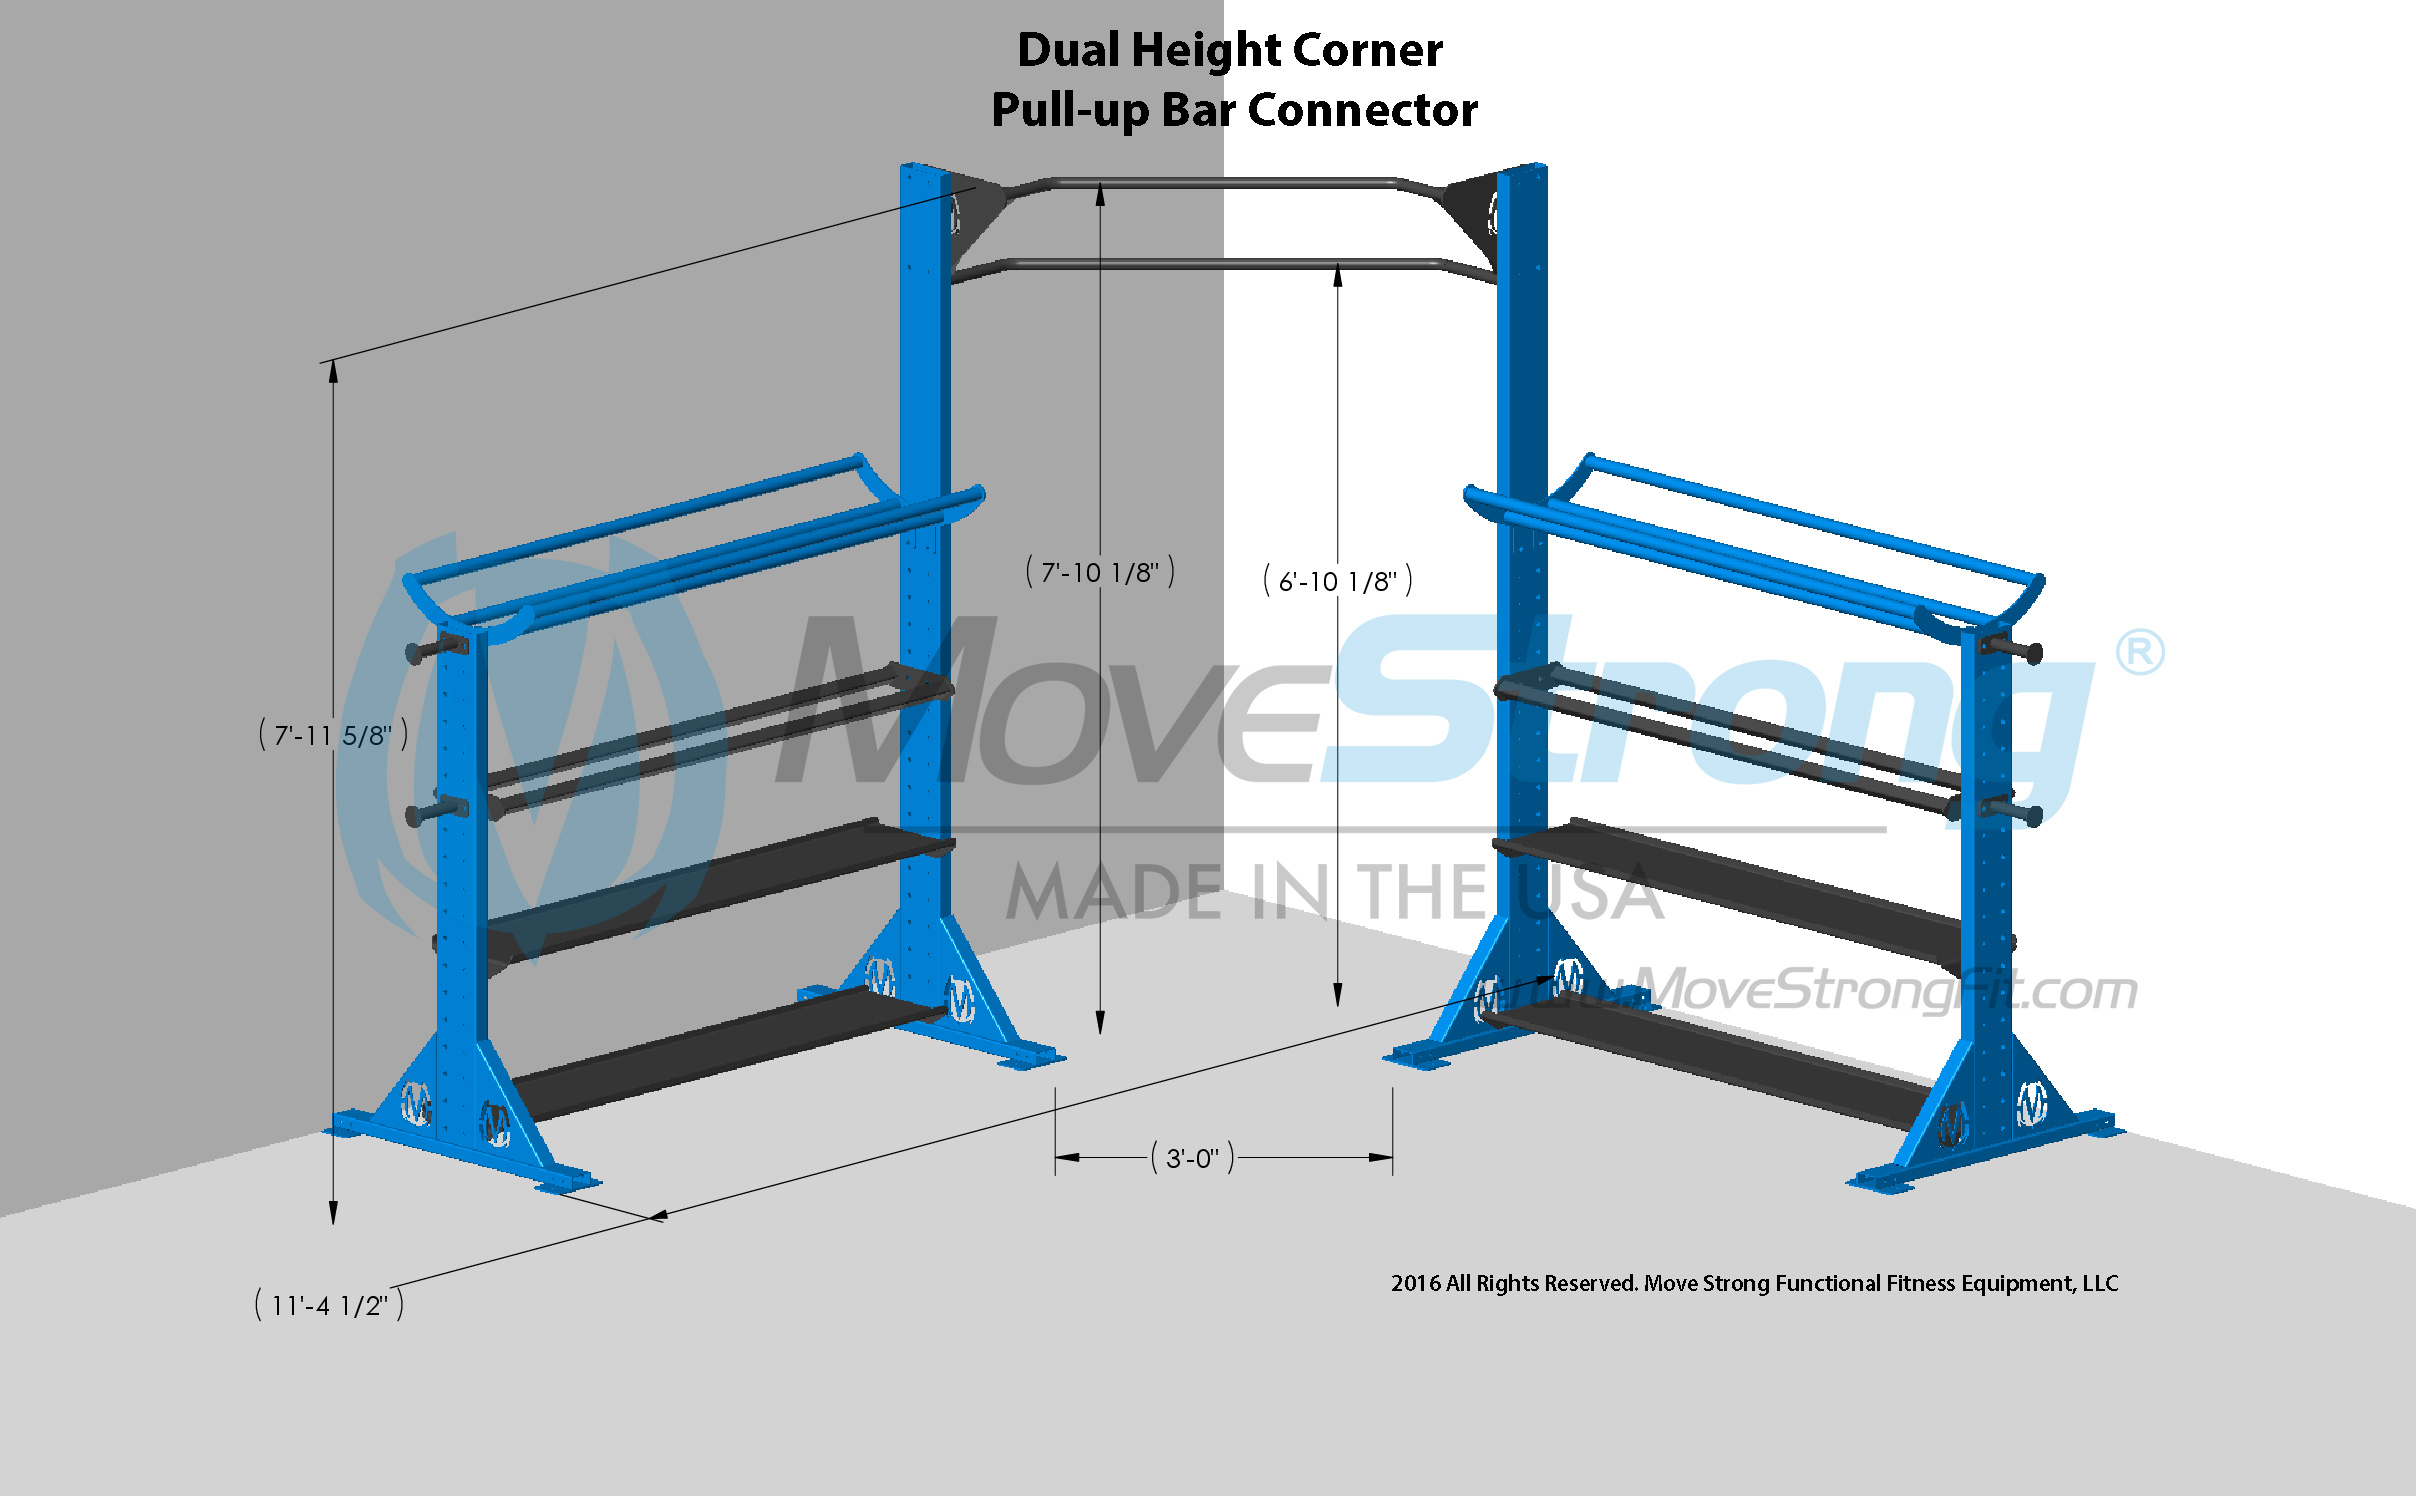 CORNER WALL PLACEMENT OPTION